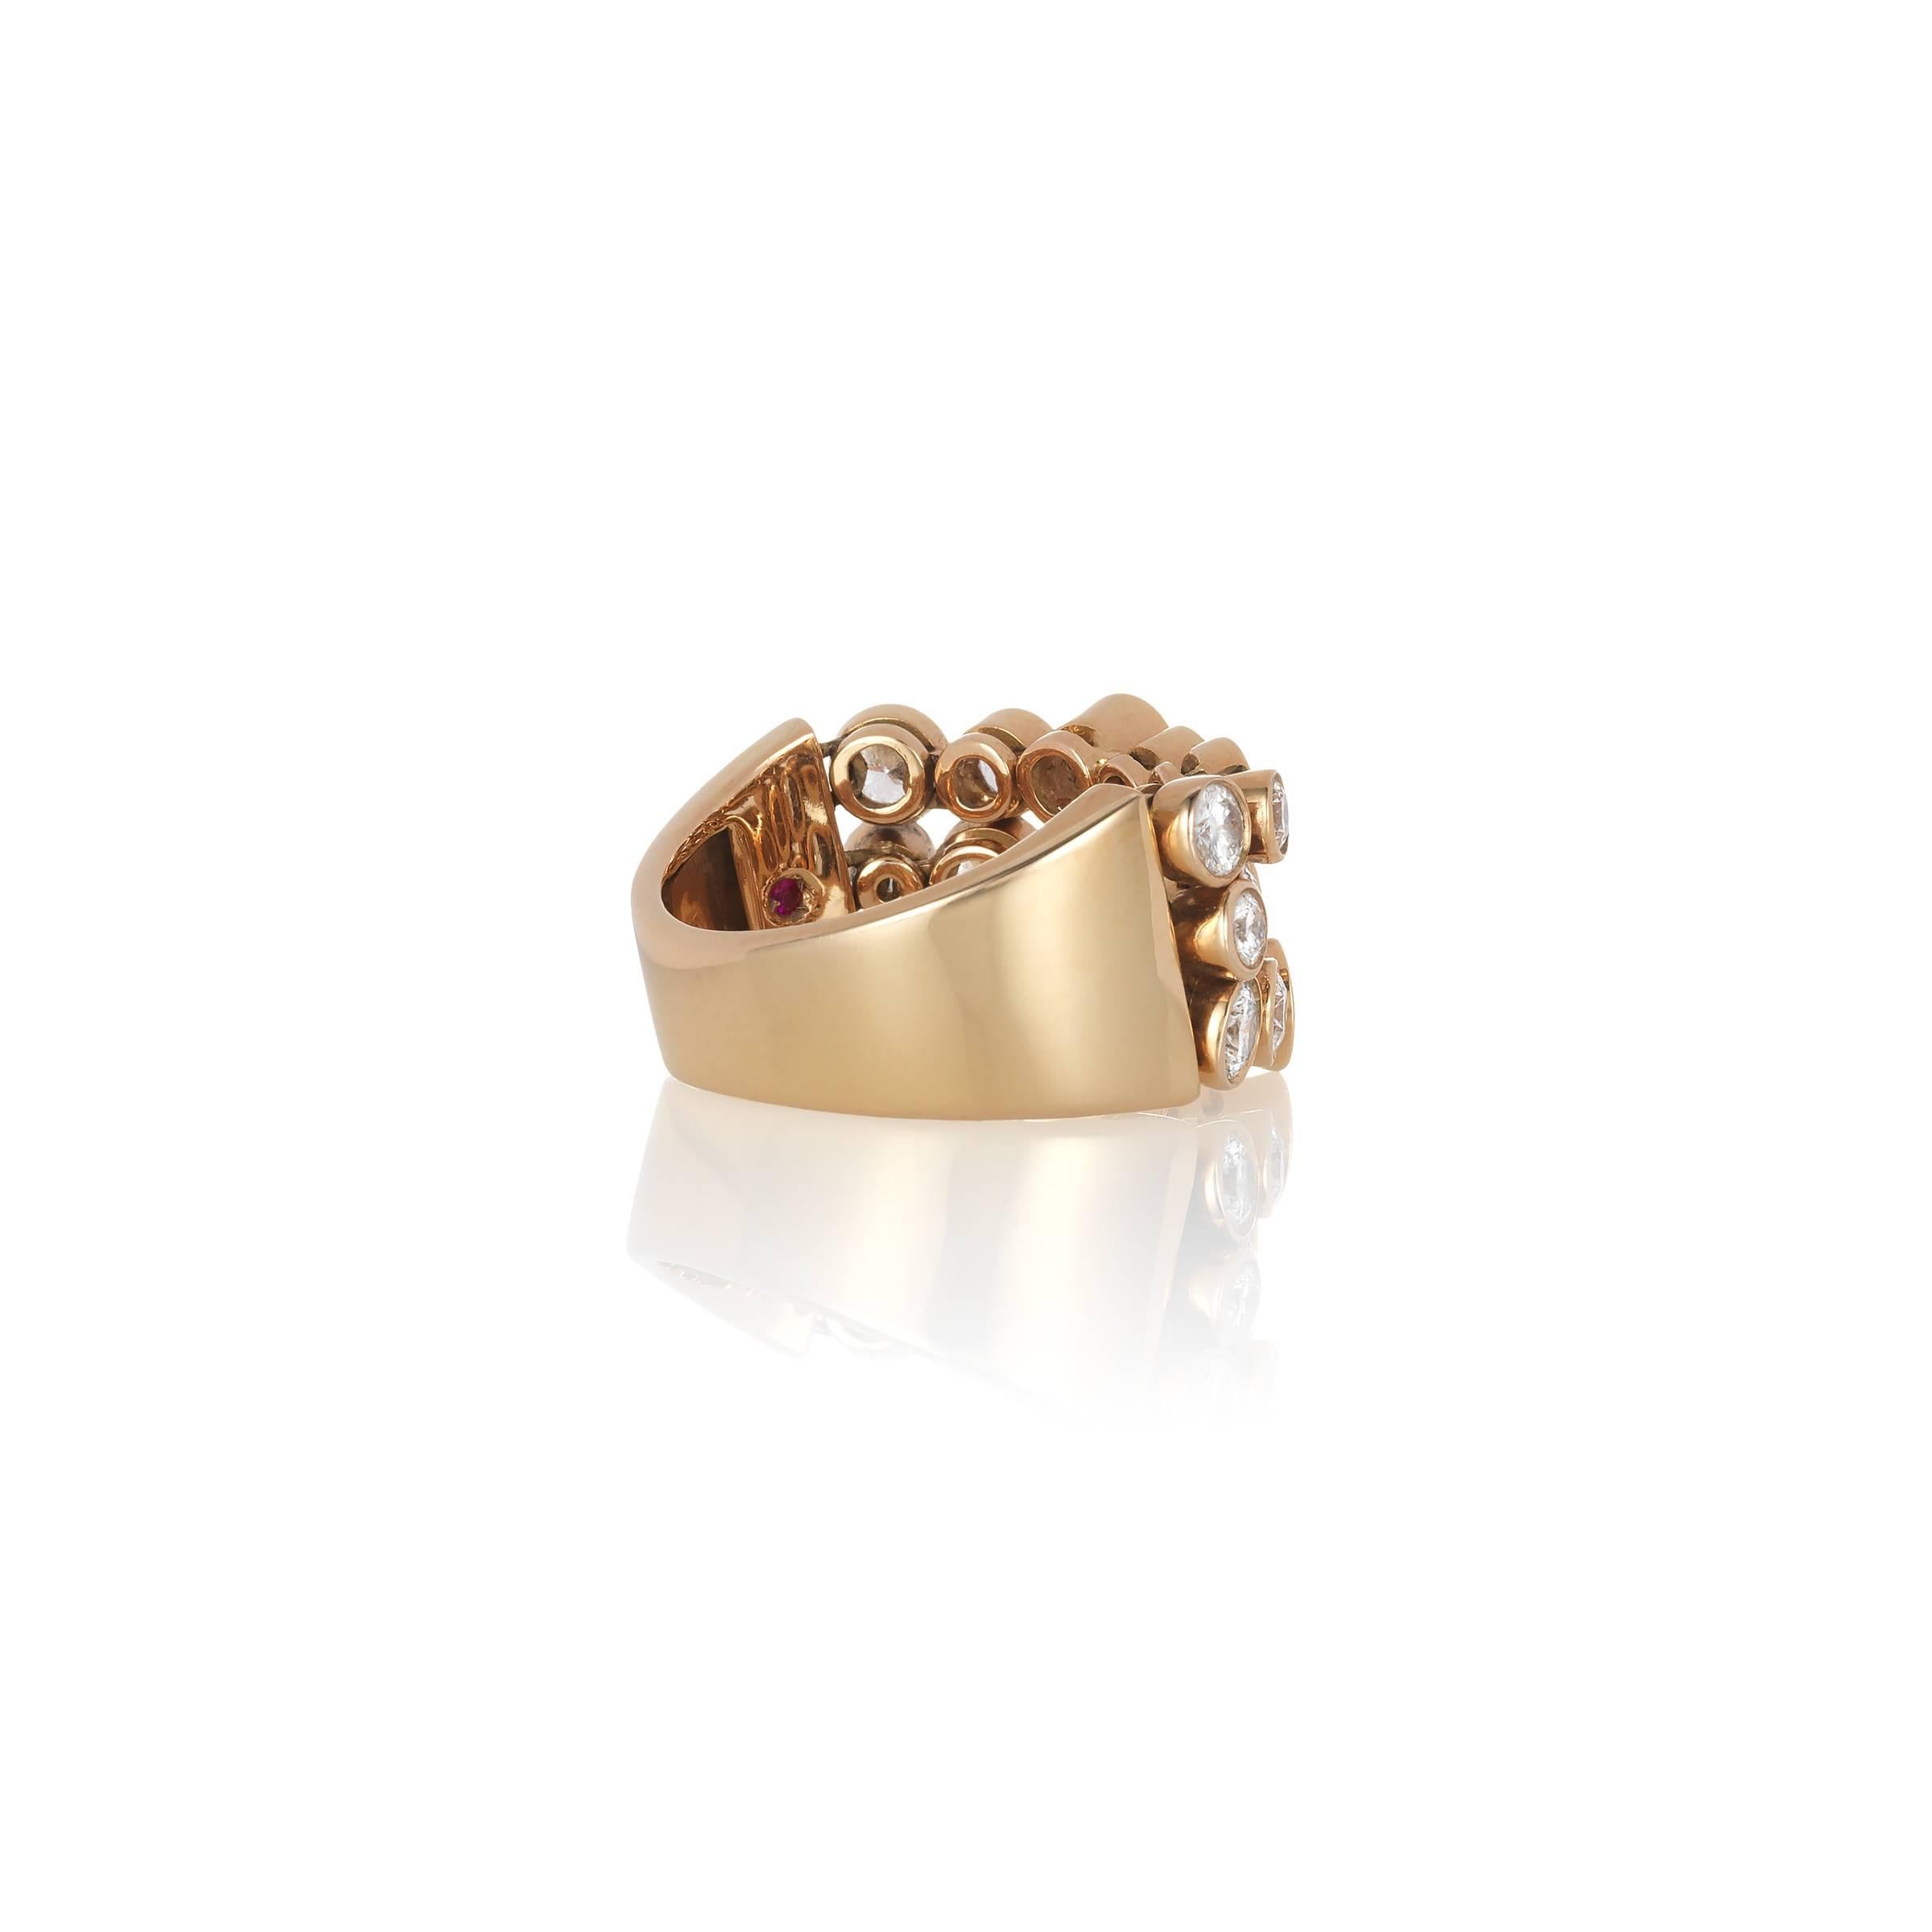 Stunning Roberto Coin Rose Gold and Diamond Ring from the Cento Collection. 
Size 7 3/4 and can be sized up to two sizes difference.  
18k Rose Gold.
Each Diamond in this ring has 100 facets for a brilliant shine that is simply unparalleled.  Over